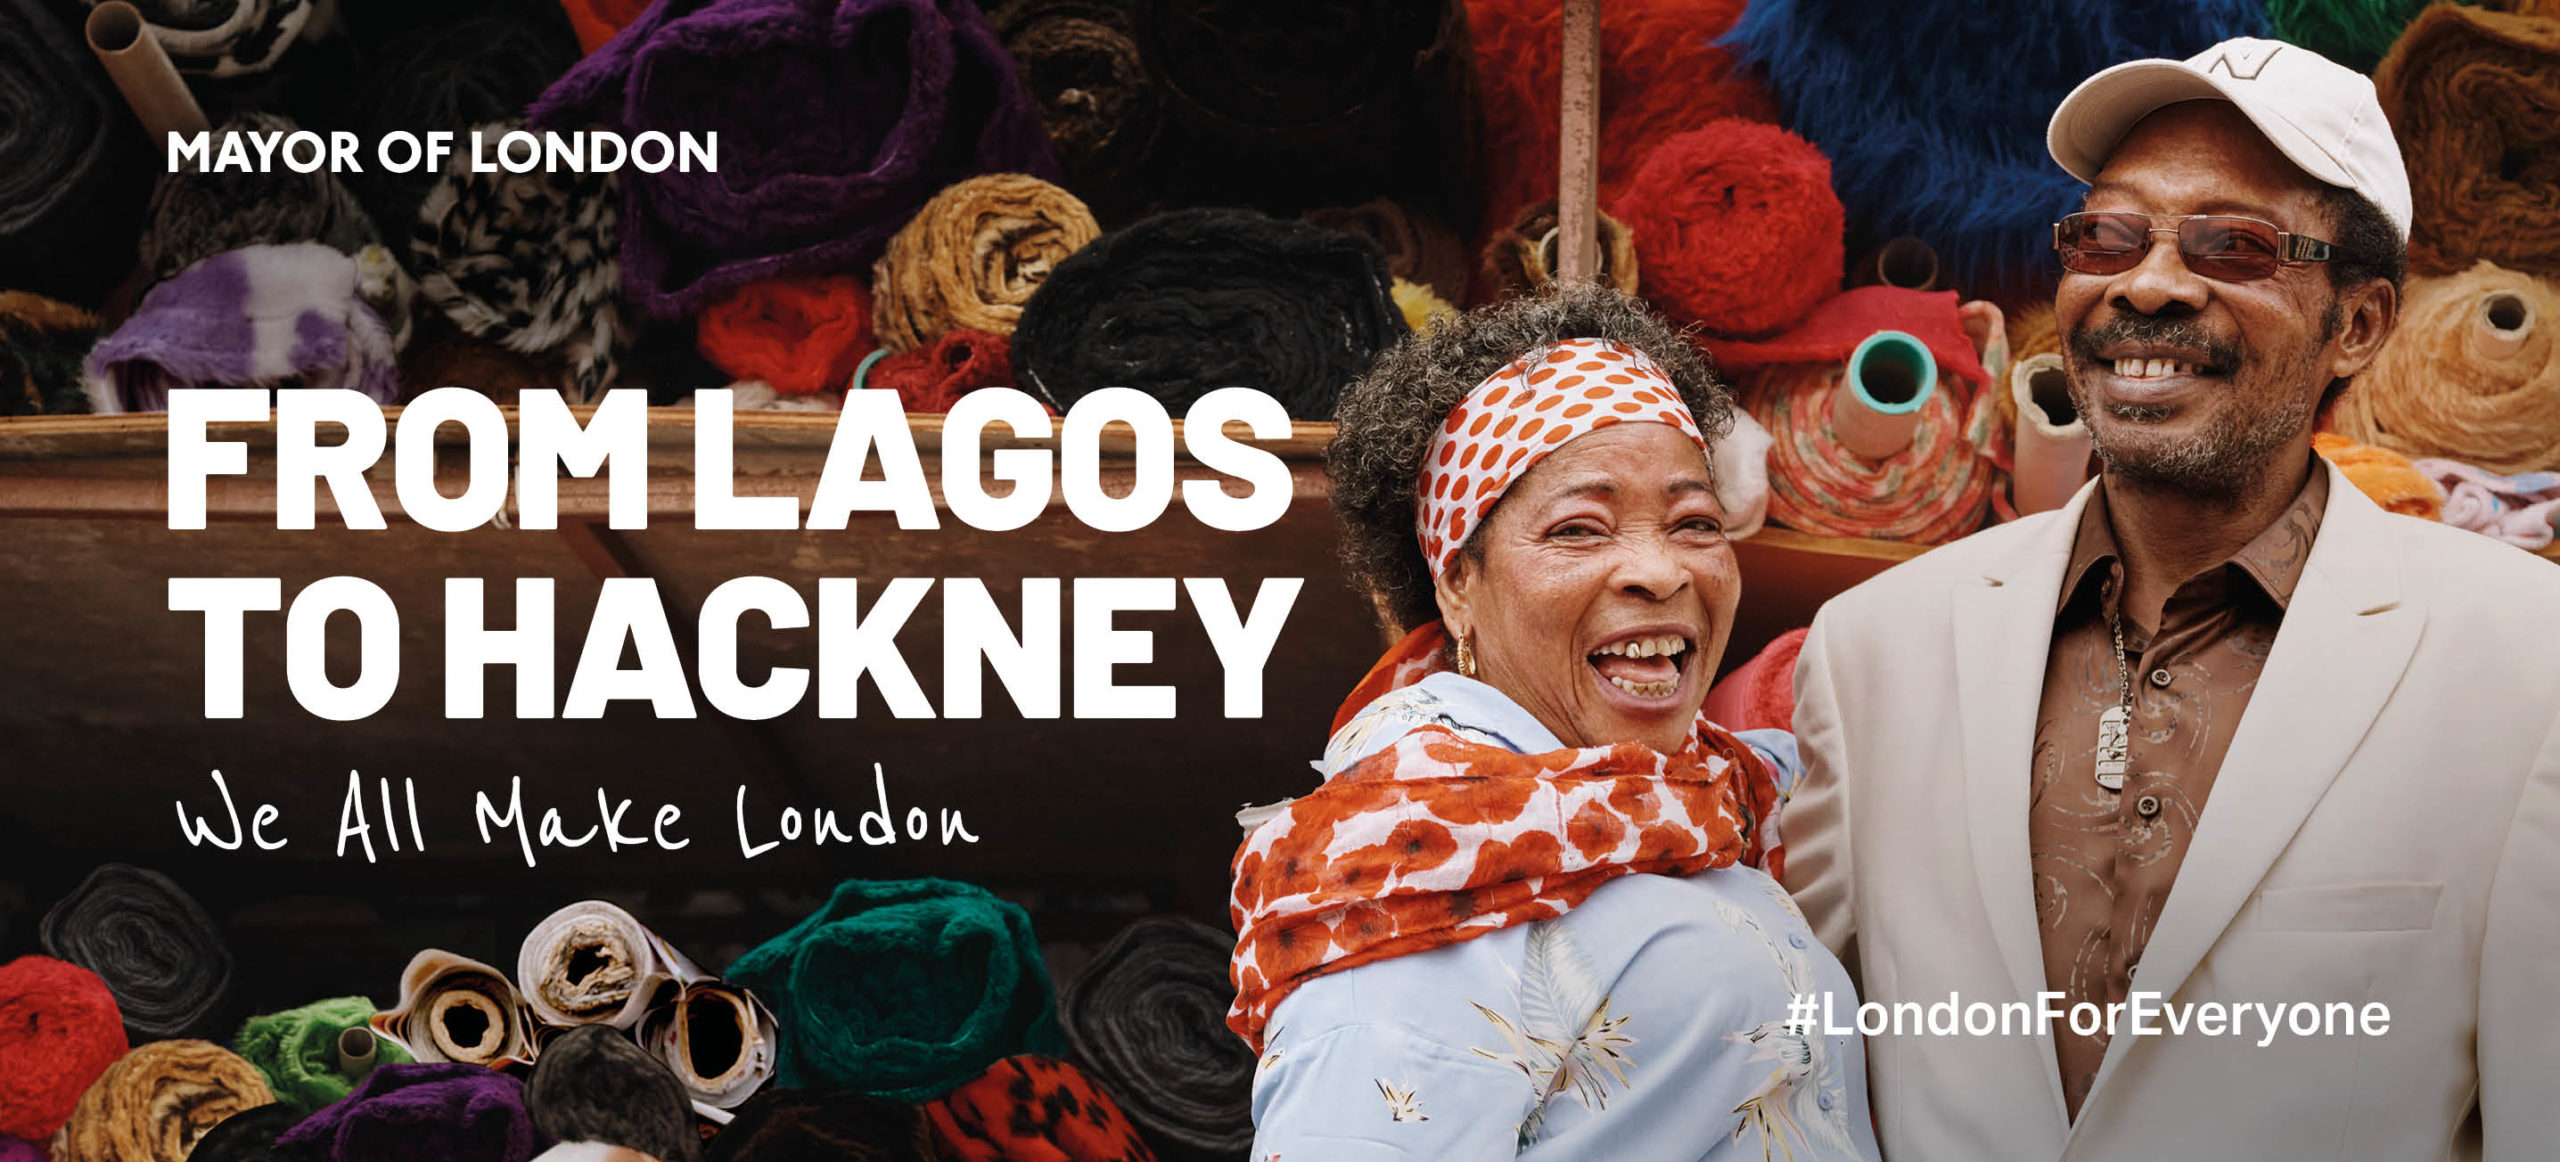 From Lagos to Hackney